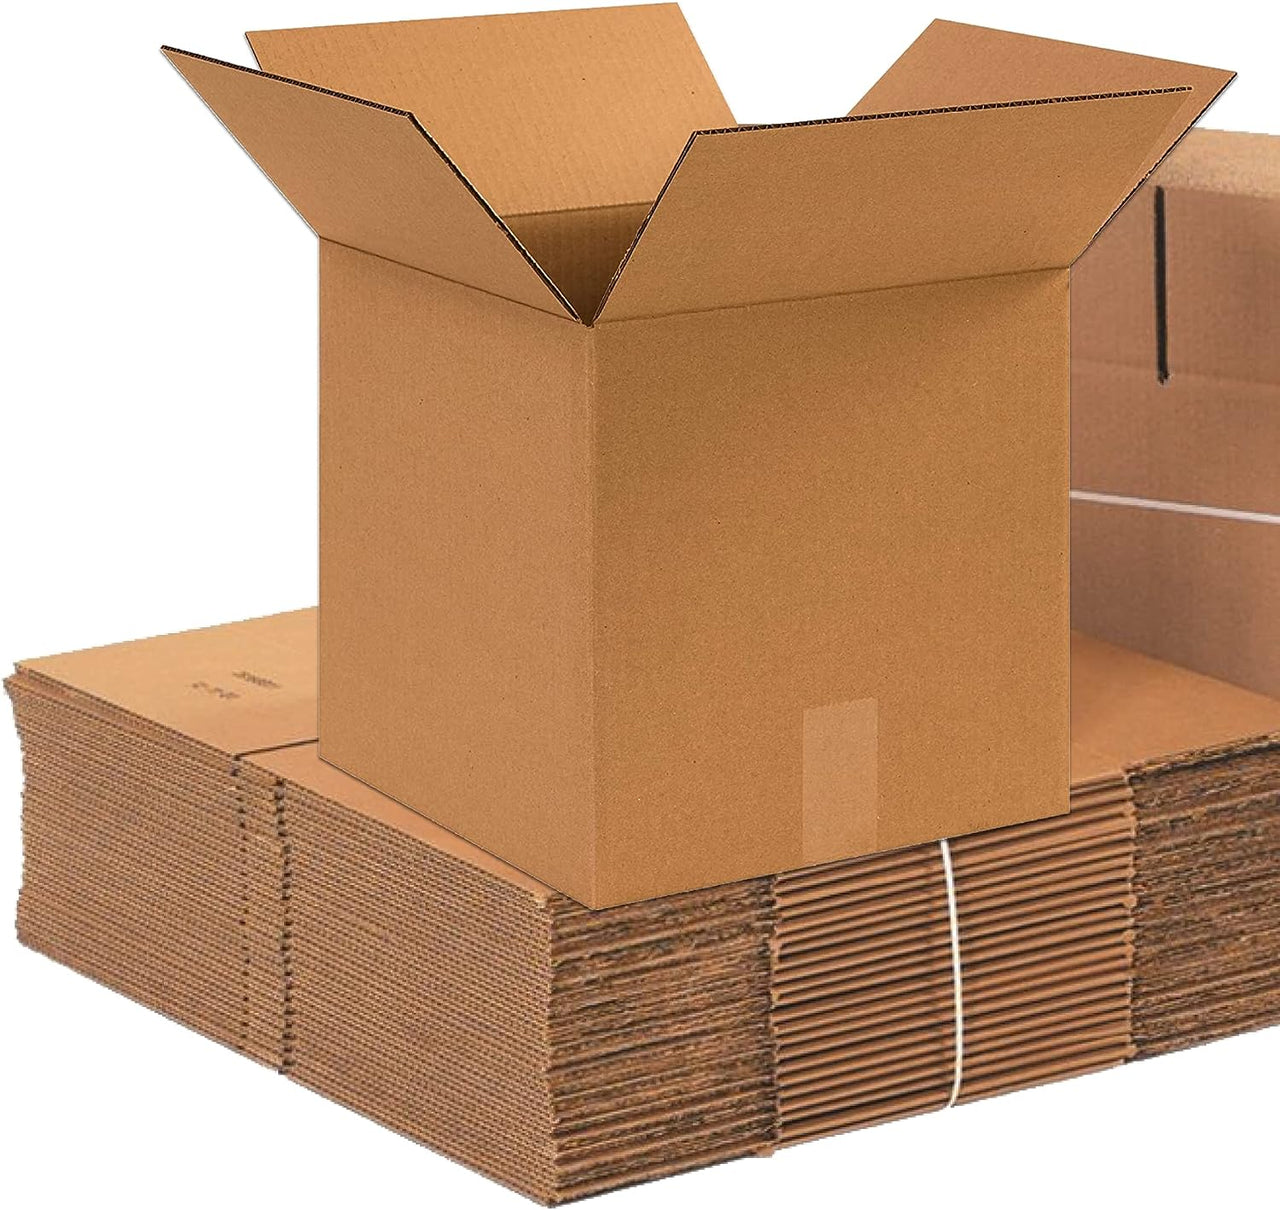 Shipping Boxes 15"L x 15"W x 15"H 10-Pack Corrugated Cardboard Box for Packing Moving Storage